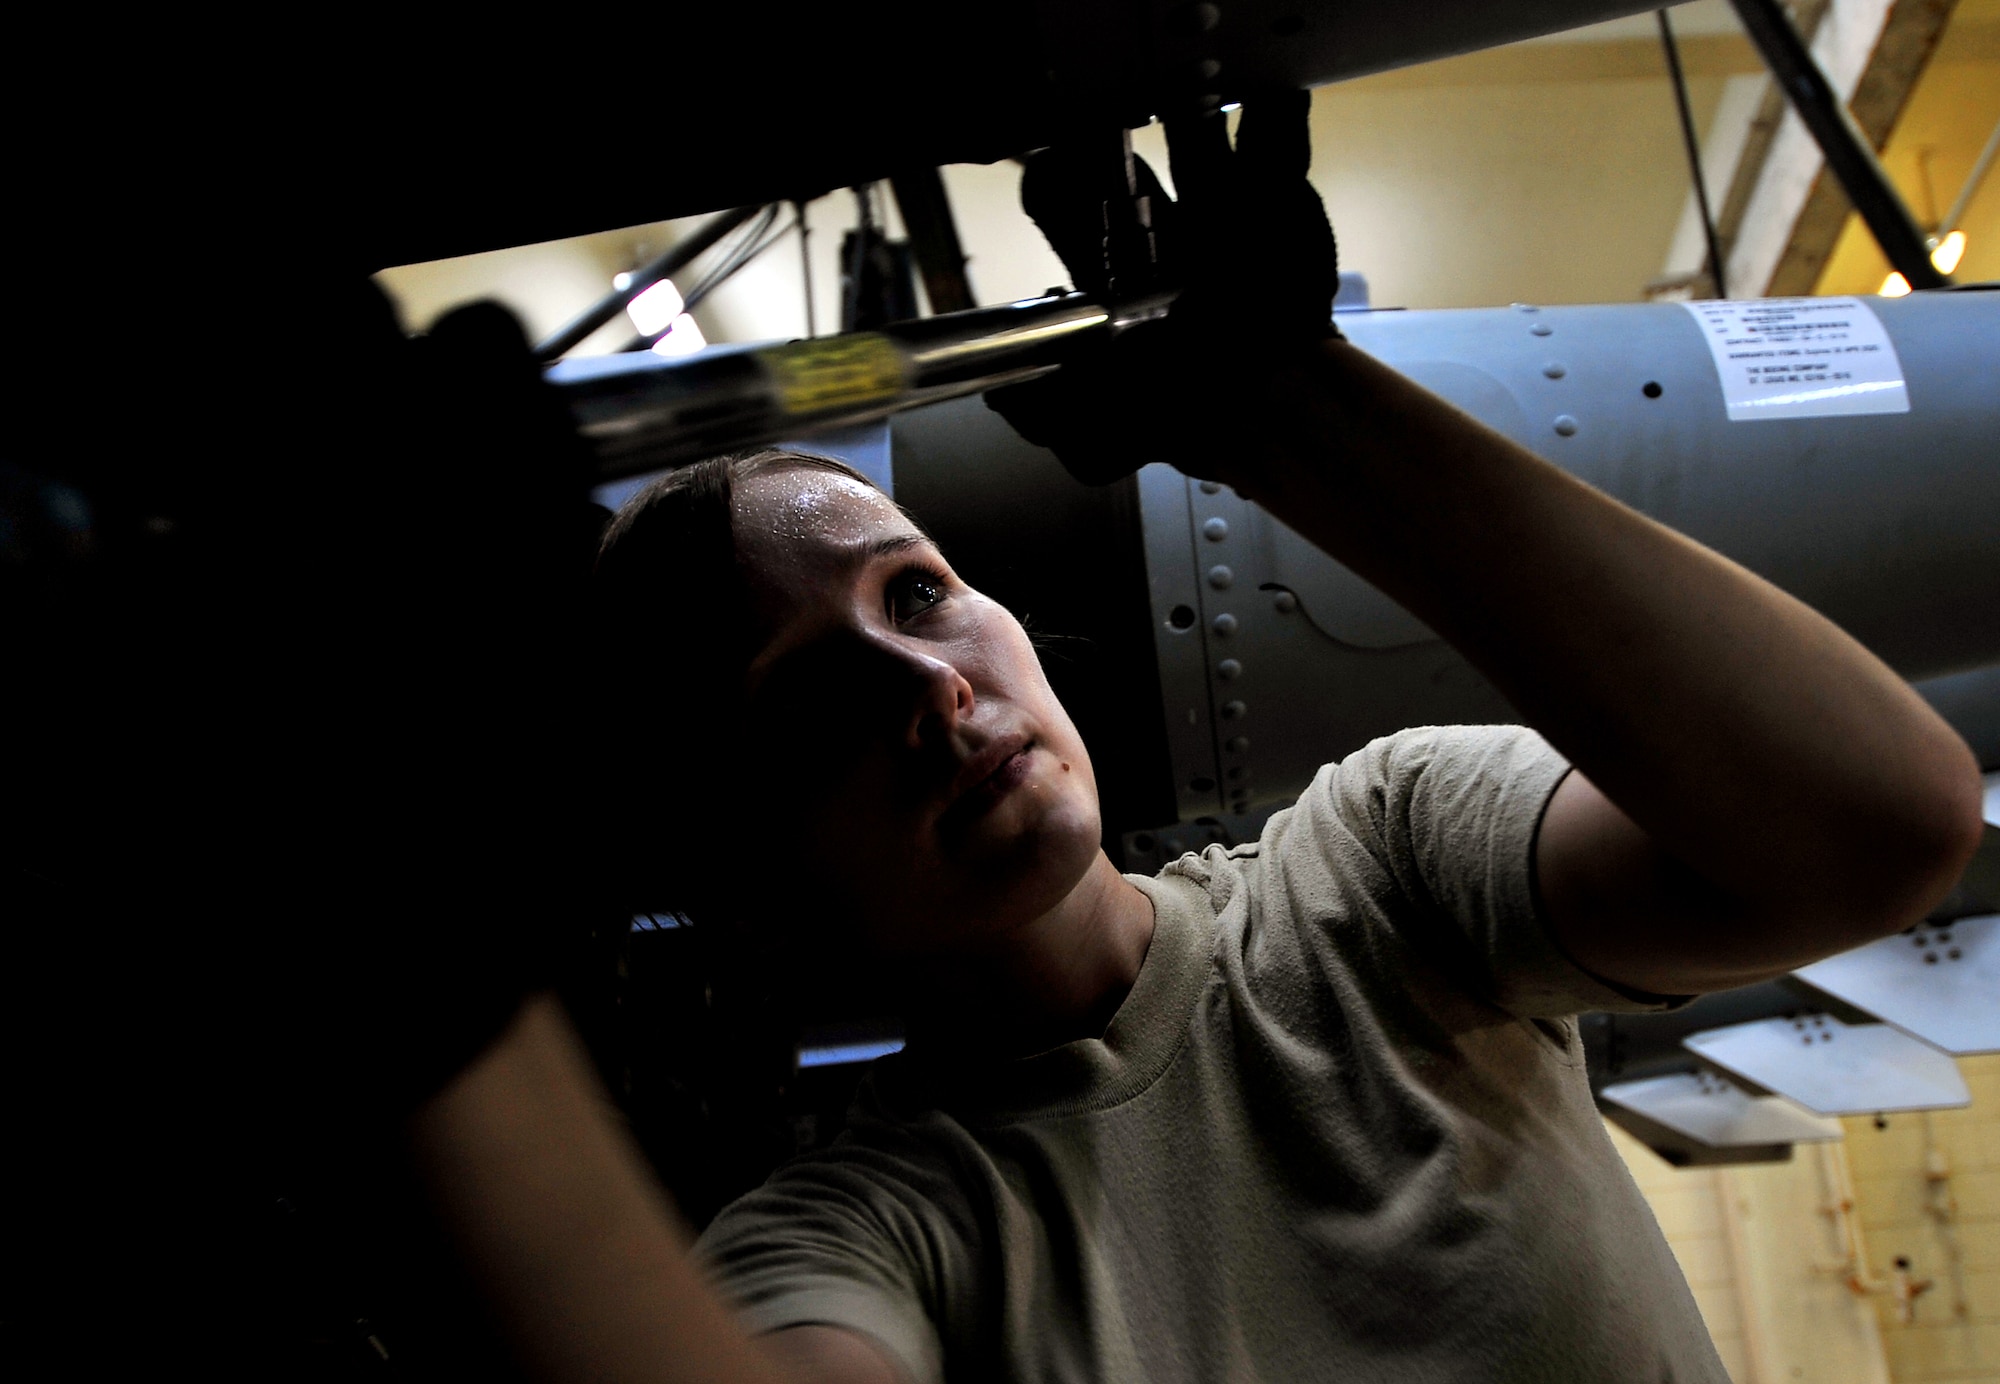 Senior Airman Niki Birch, 18th Munitions Squadron customer support technician, attaches the tail-ends of Mark 83 bomb bodies during Beverly High 10-02 at Kadena Air Base, Japan, March 24. The 18th Wing is participating in a Local Operational Readiness Exercise March 22-26 to test the readiness of Kadena Airmen. (U.S. Air Force photo/Tech. Sgt. Rey Ramon)   